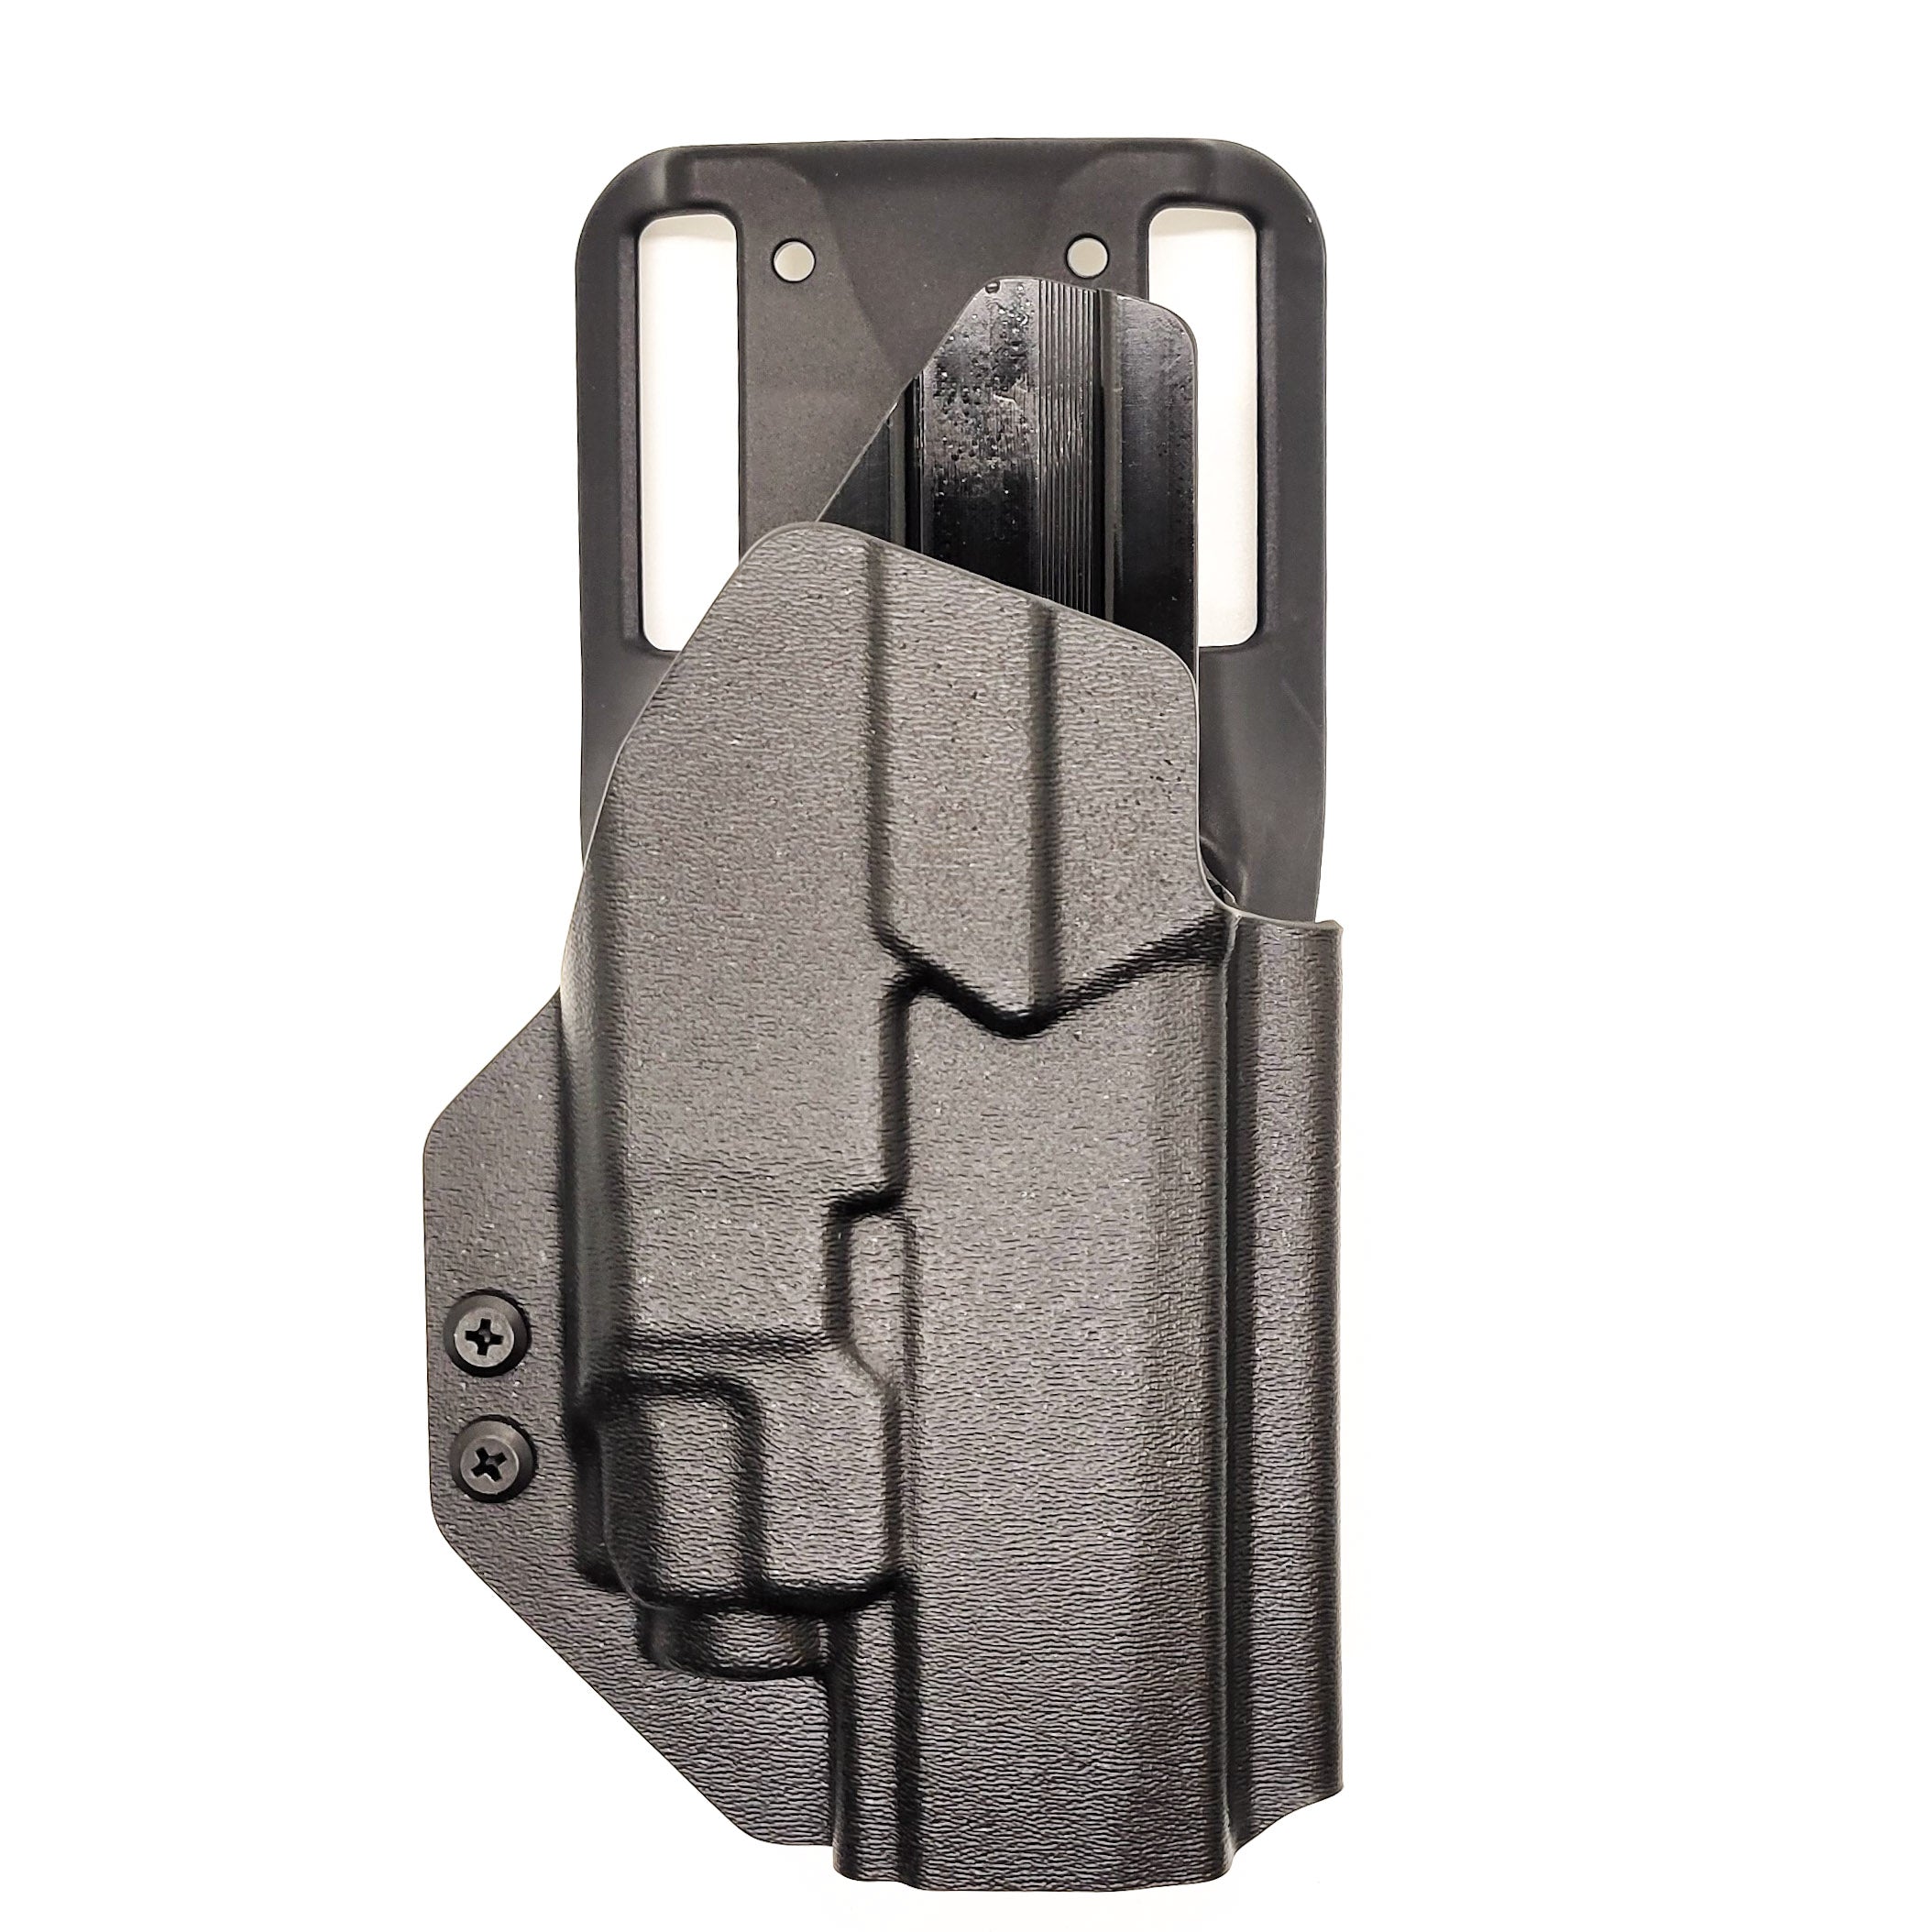 Outside waistband duty/competition style holster designed to fit the Full Size and Carry P320 series with Streamlight TLR-8 and TLR-8A weapon mounted light and Align Tactical Thumb Rest Takedown Lever. Holster will accommodate the M17, M18, and X-Five models as well as the Carry and Compact using our competition belt mounting options. 